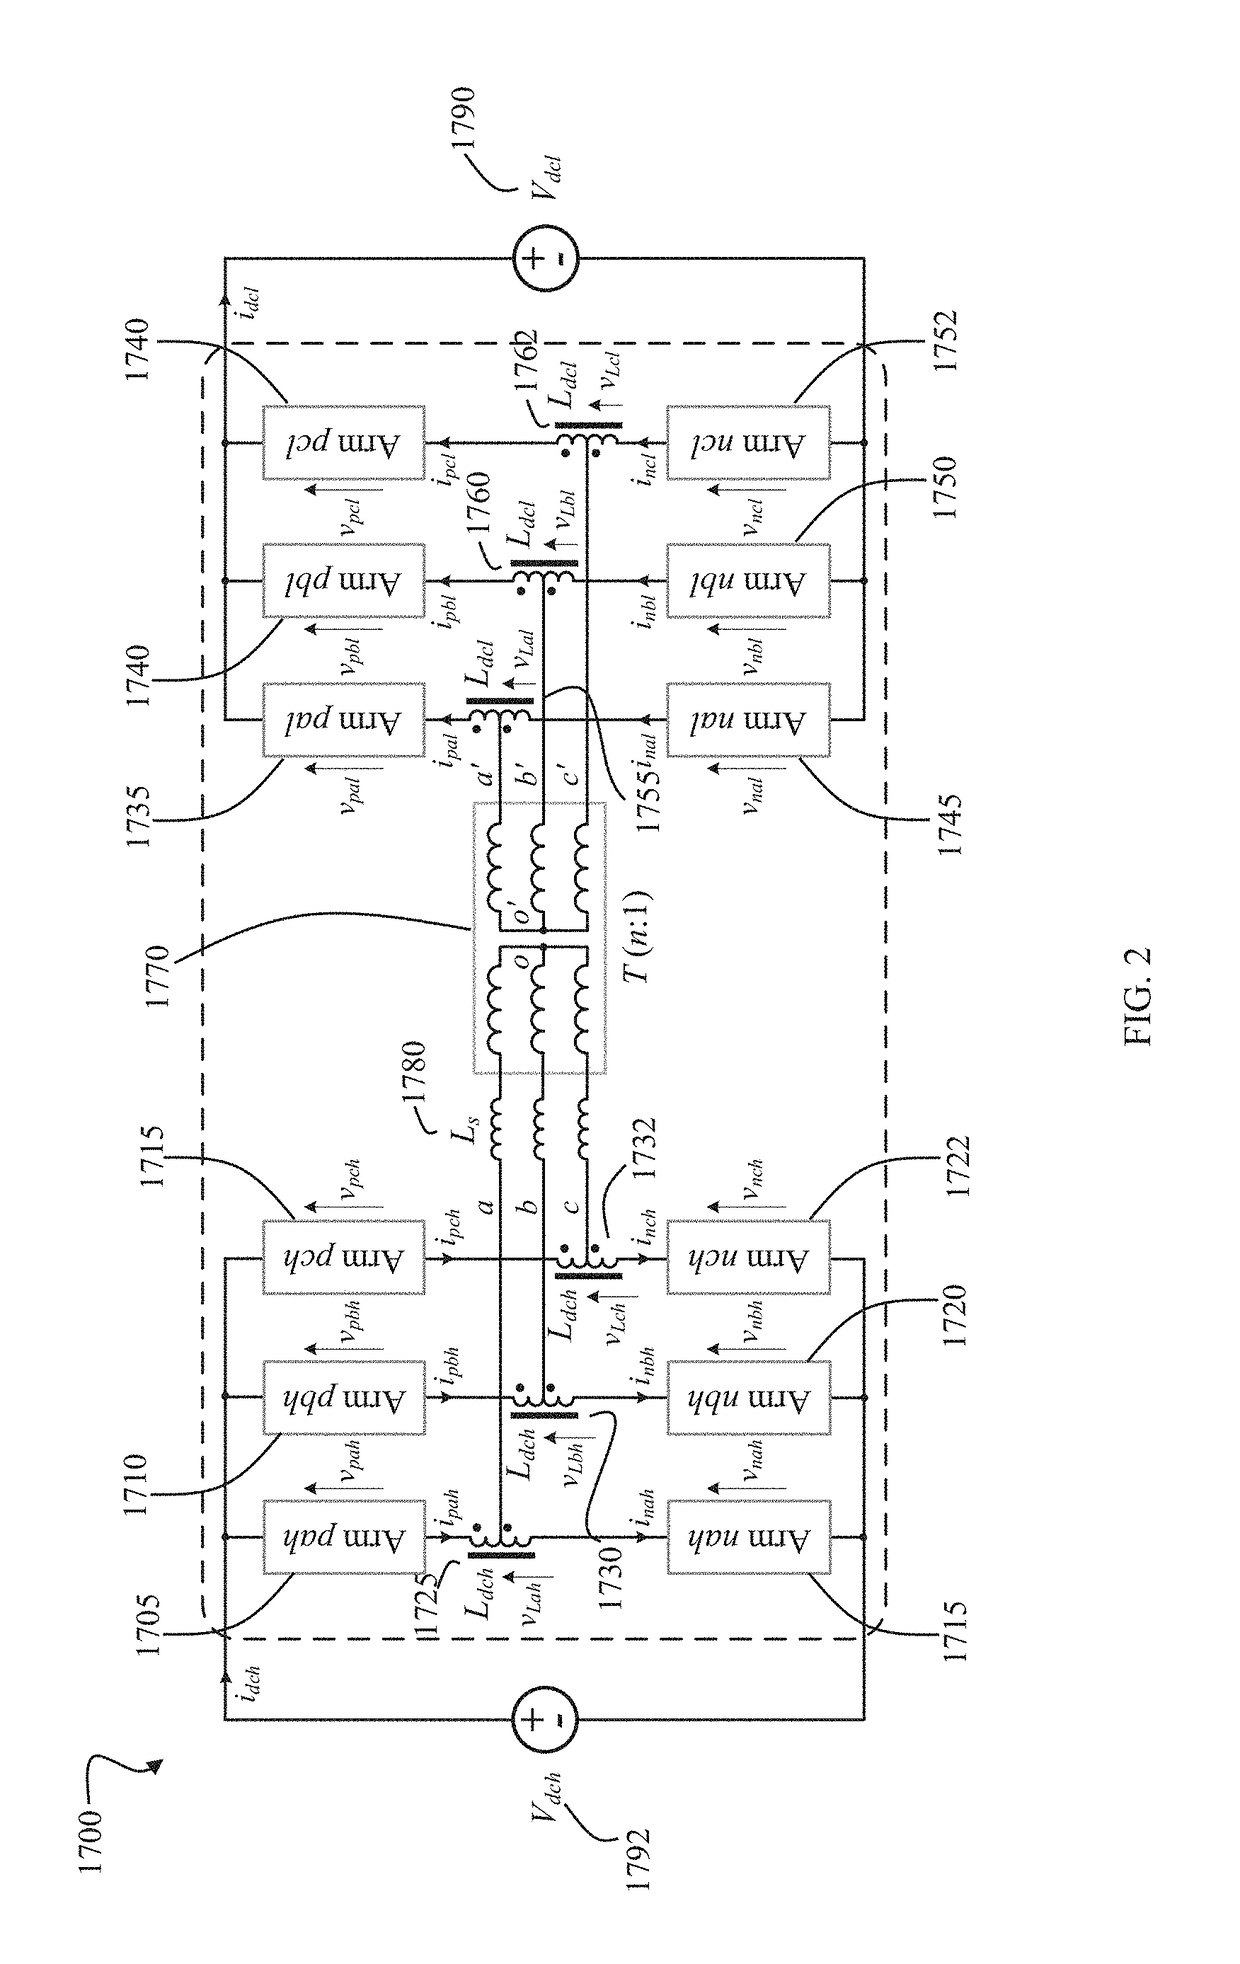 Modular multilevel DC-DC converter and associated method of use